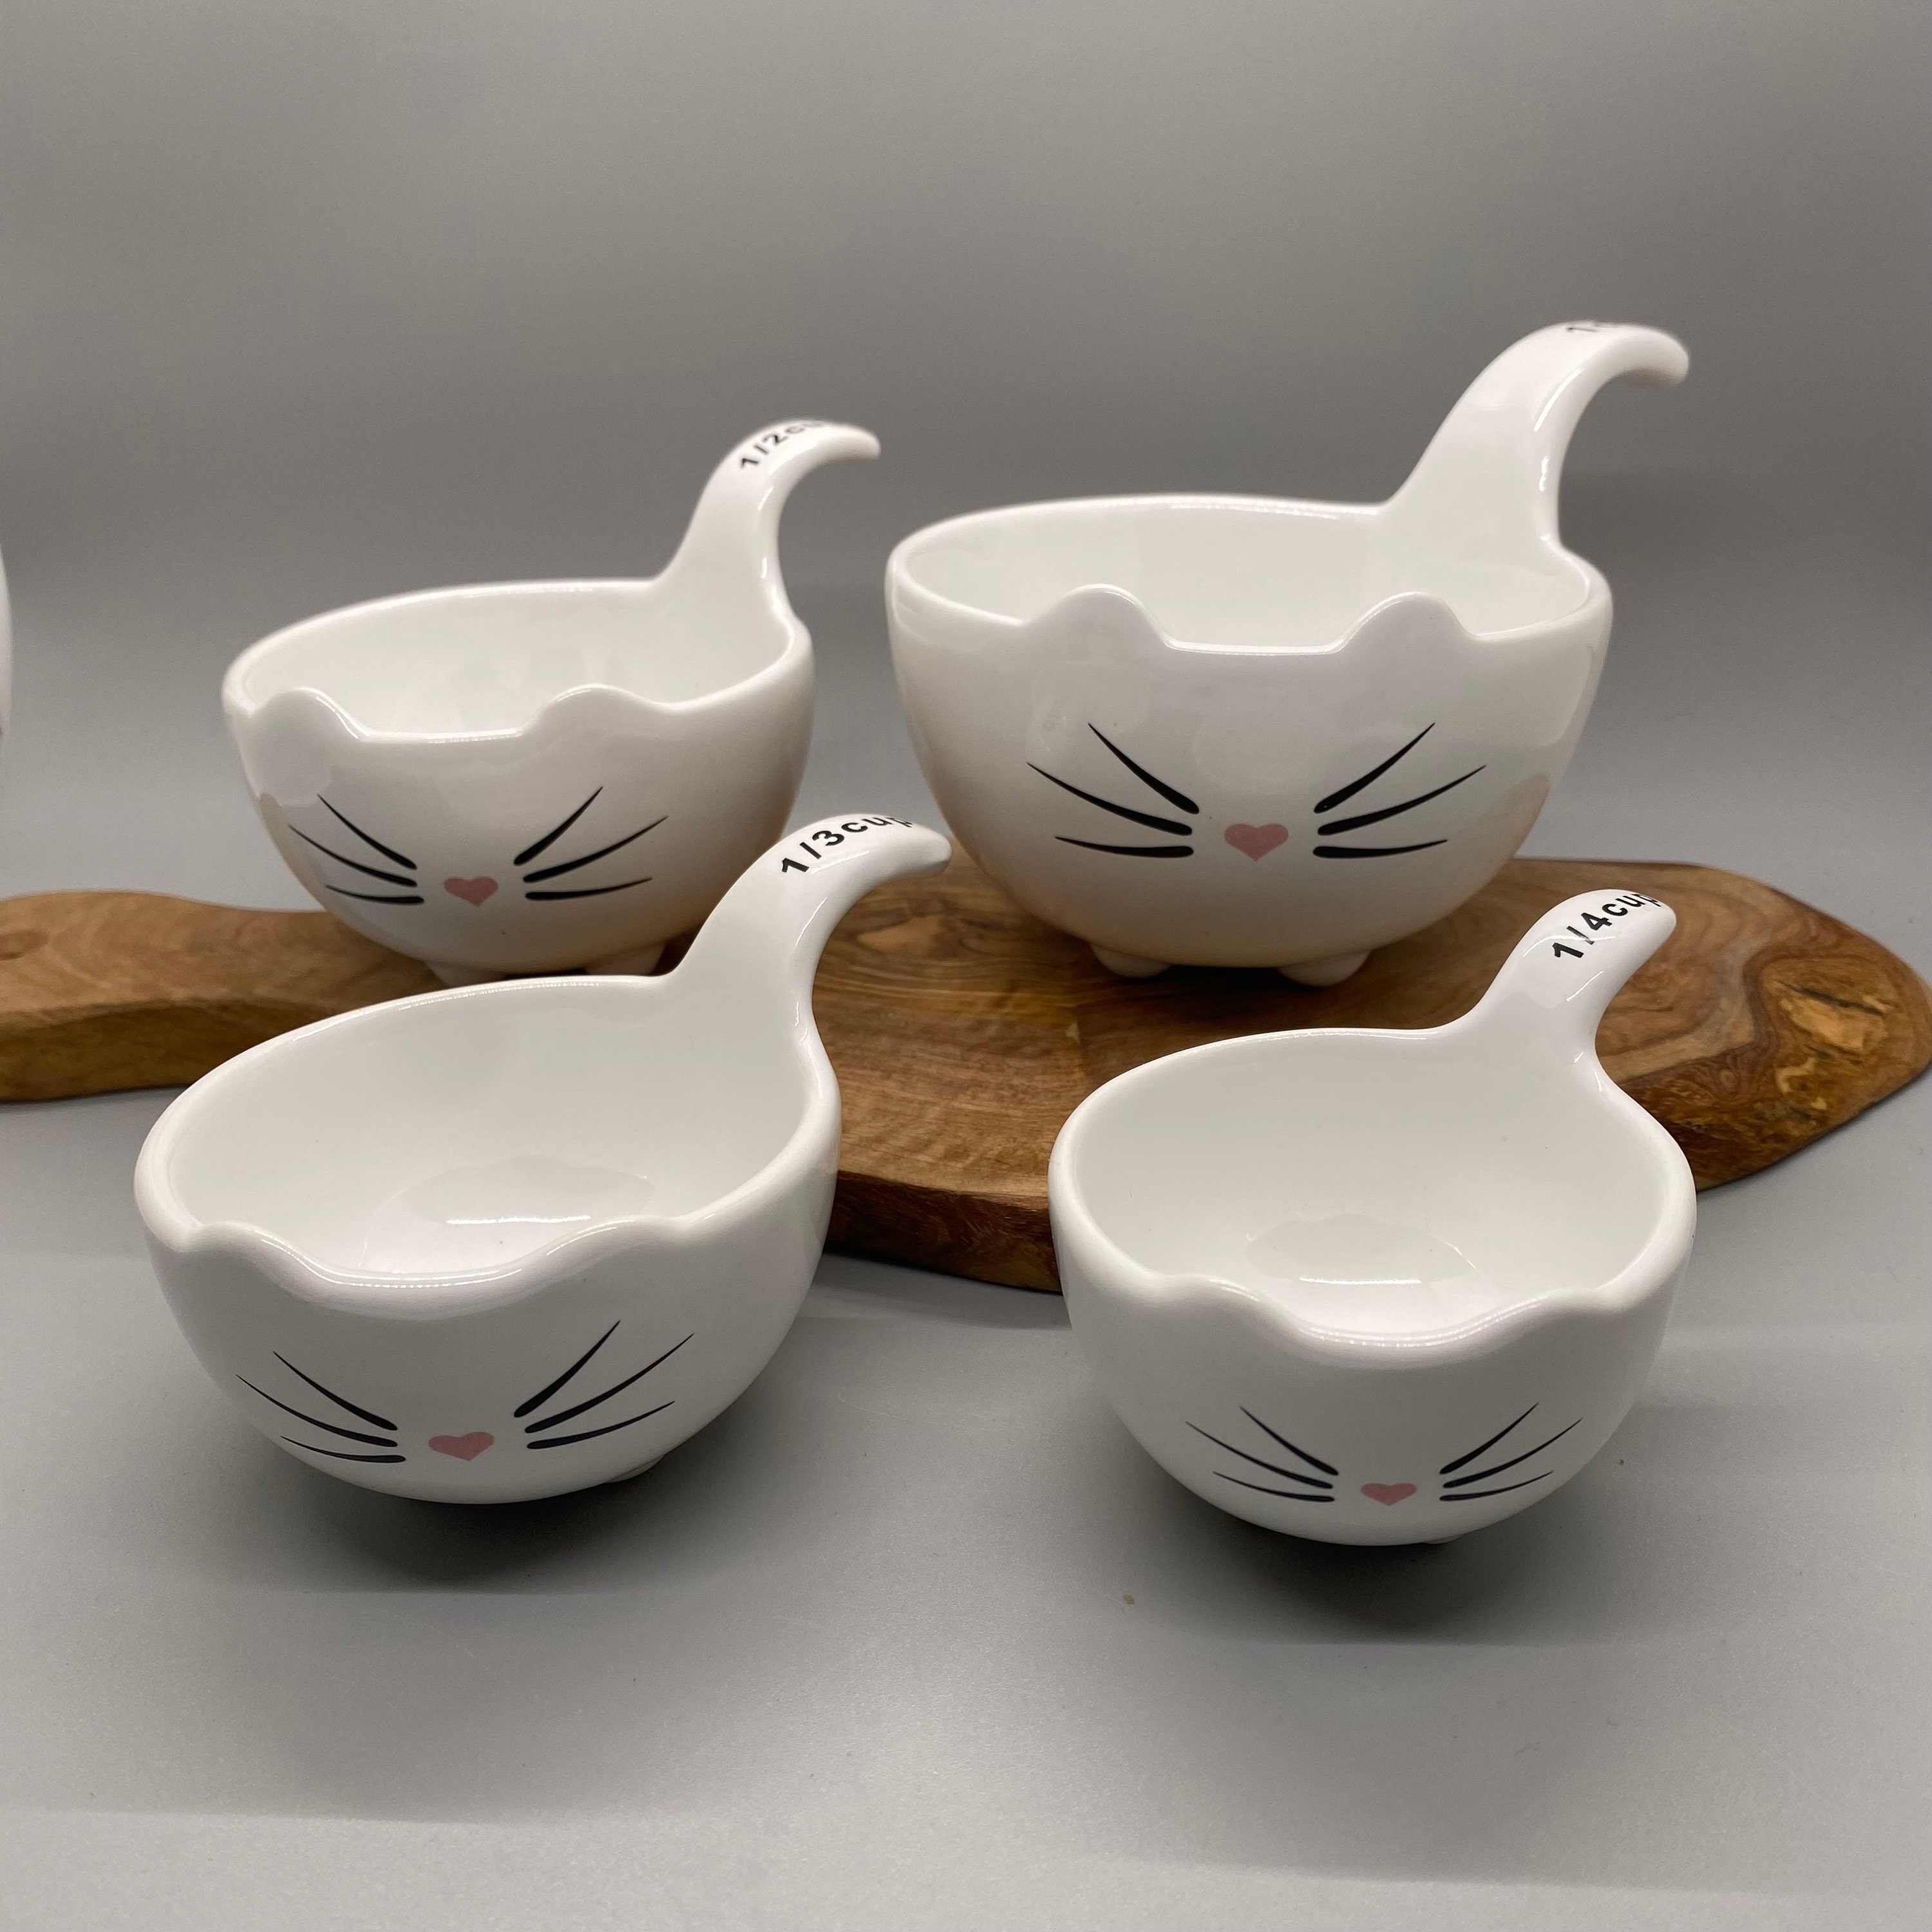 Kitty Measuring Cups & Spoons For Cat Lovers Who Cook! – Meow As Fluff